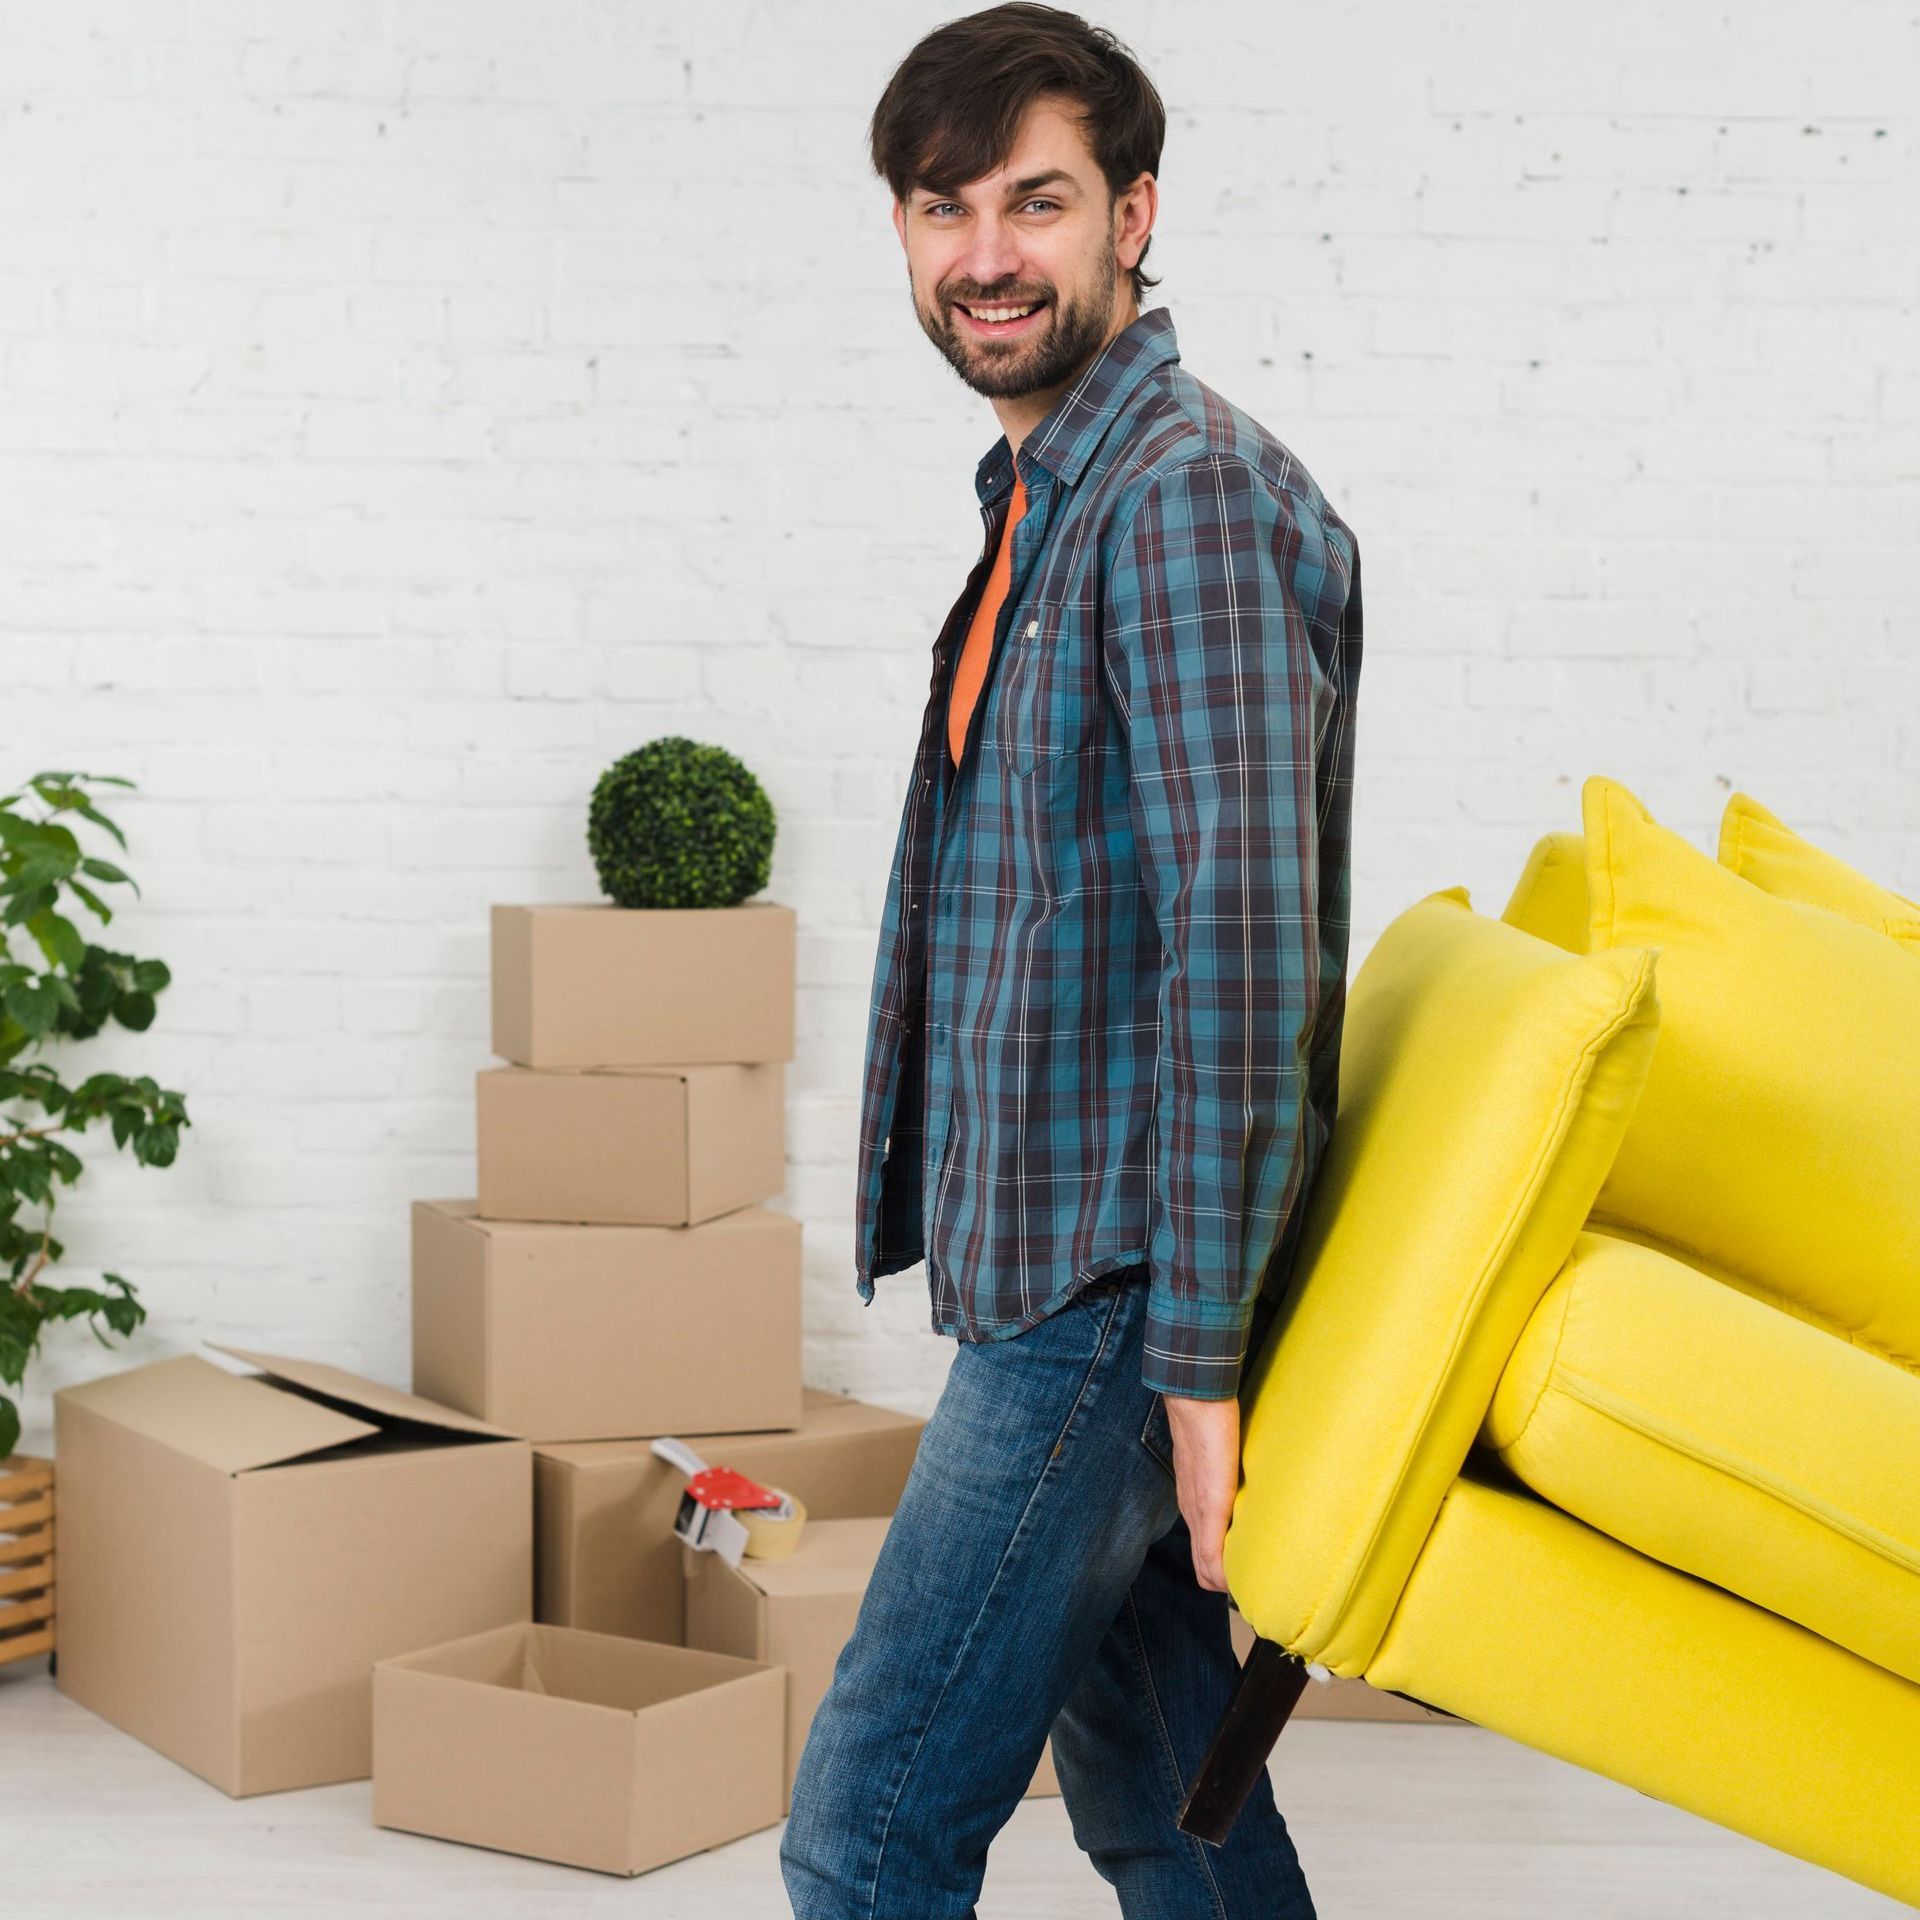 A man is carrying a yellow couch in a living room.